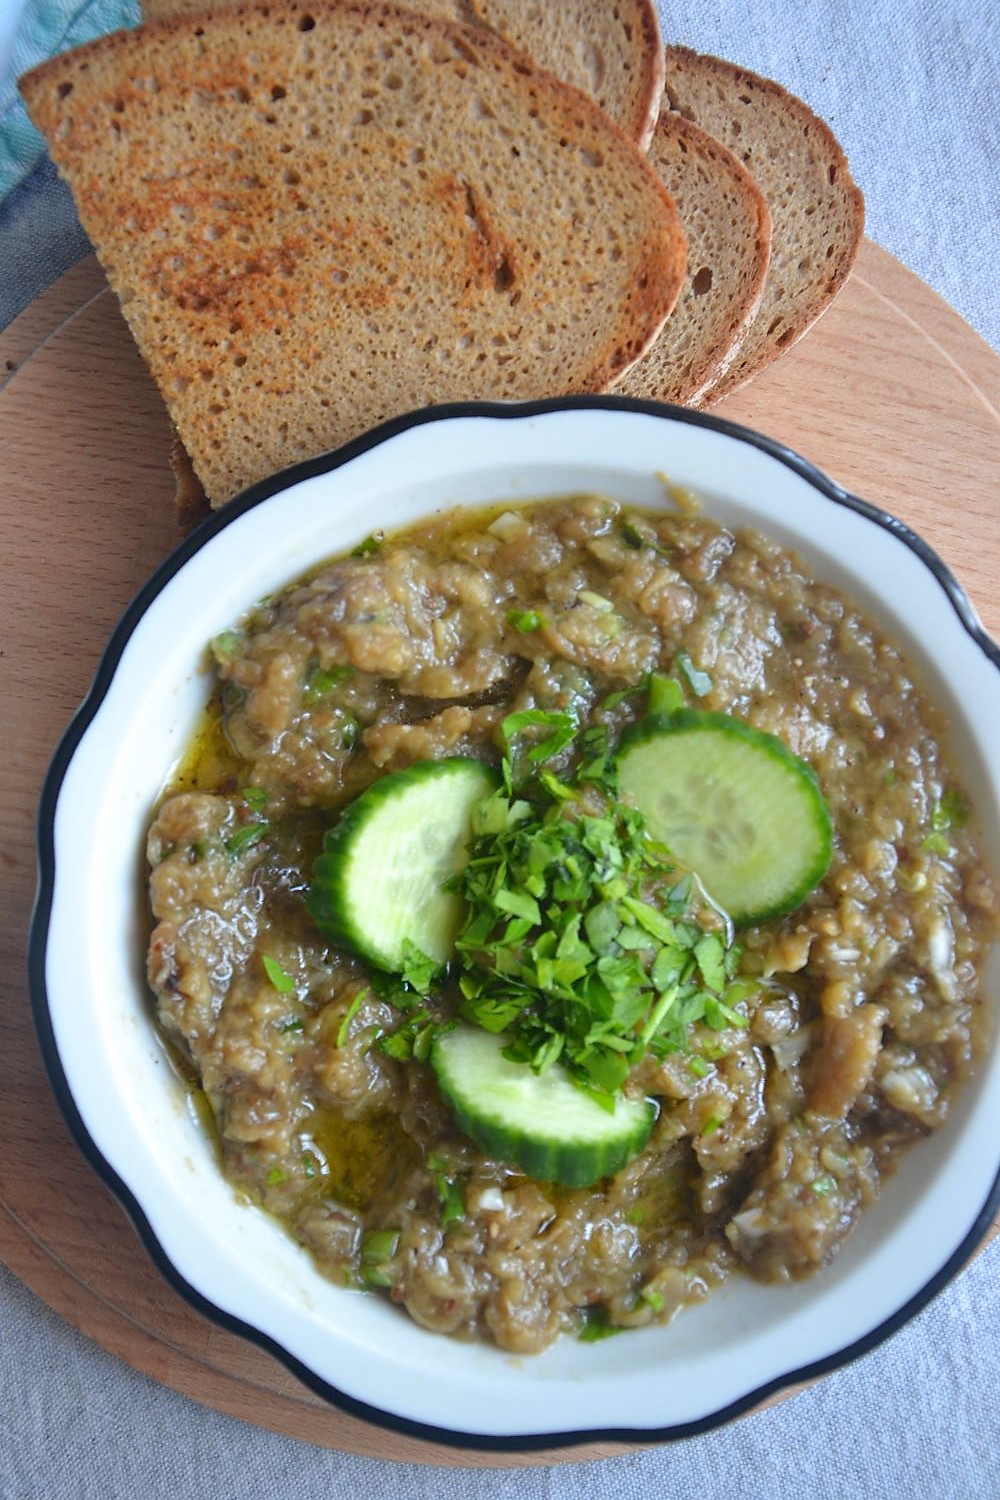 Melirzanosalate with baked bread in a wooden board